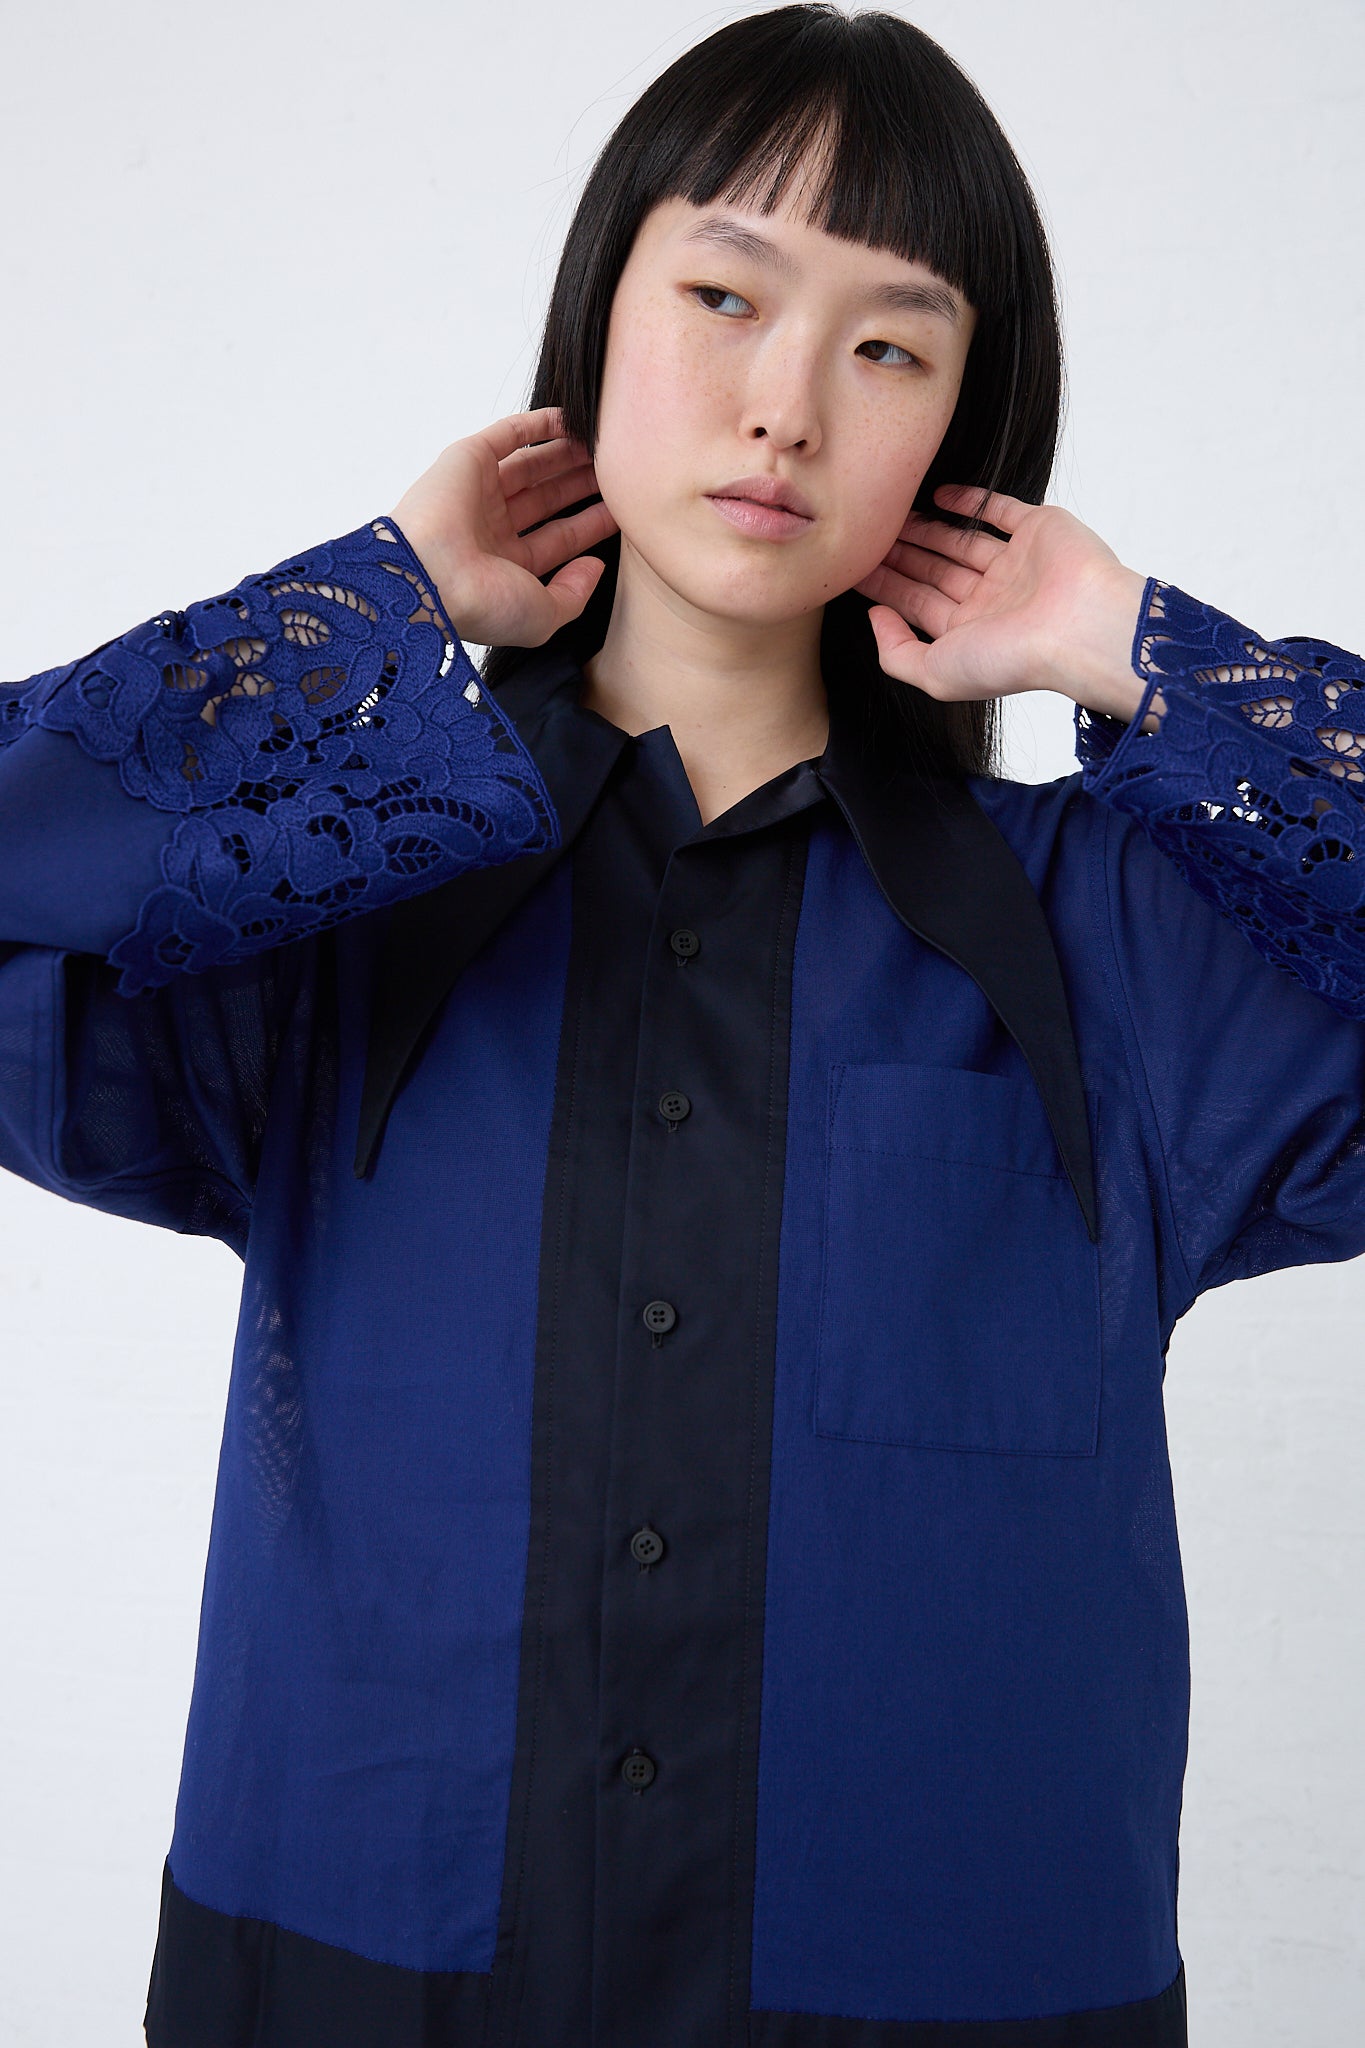 A woman donning a beautiful TOGA PULLA Mesh Lace Shirt in Blue adorned with delicate lace sleeves.